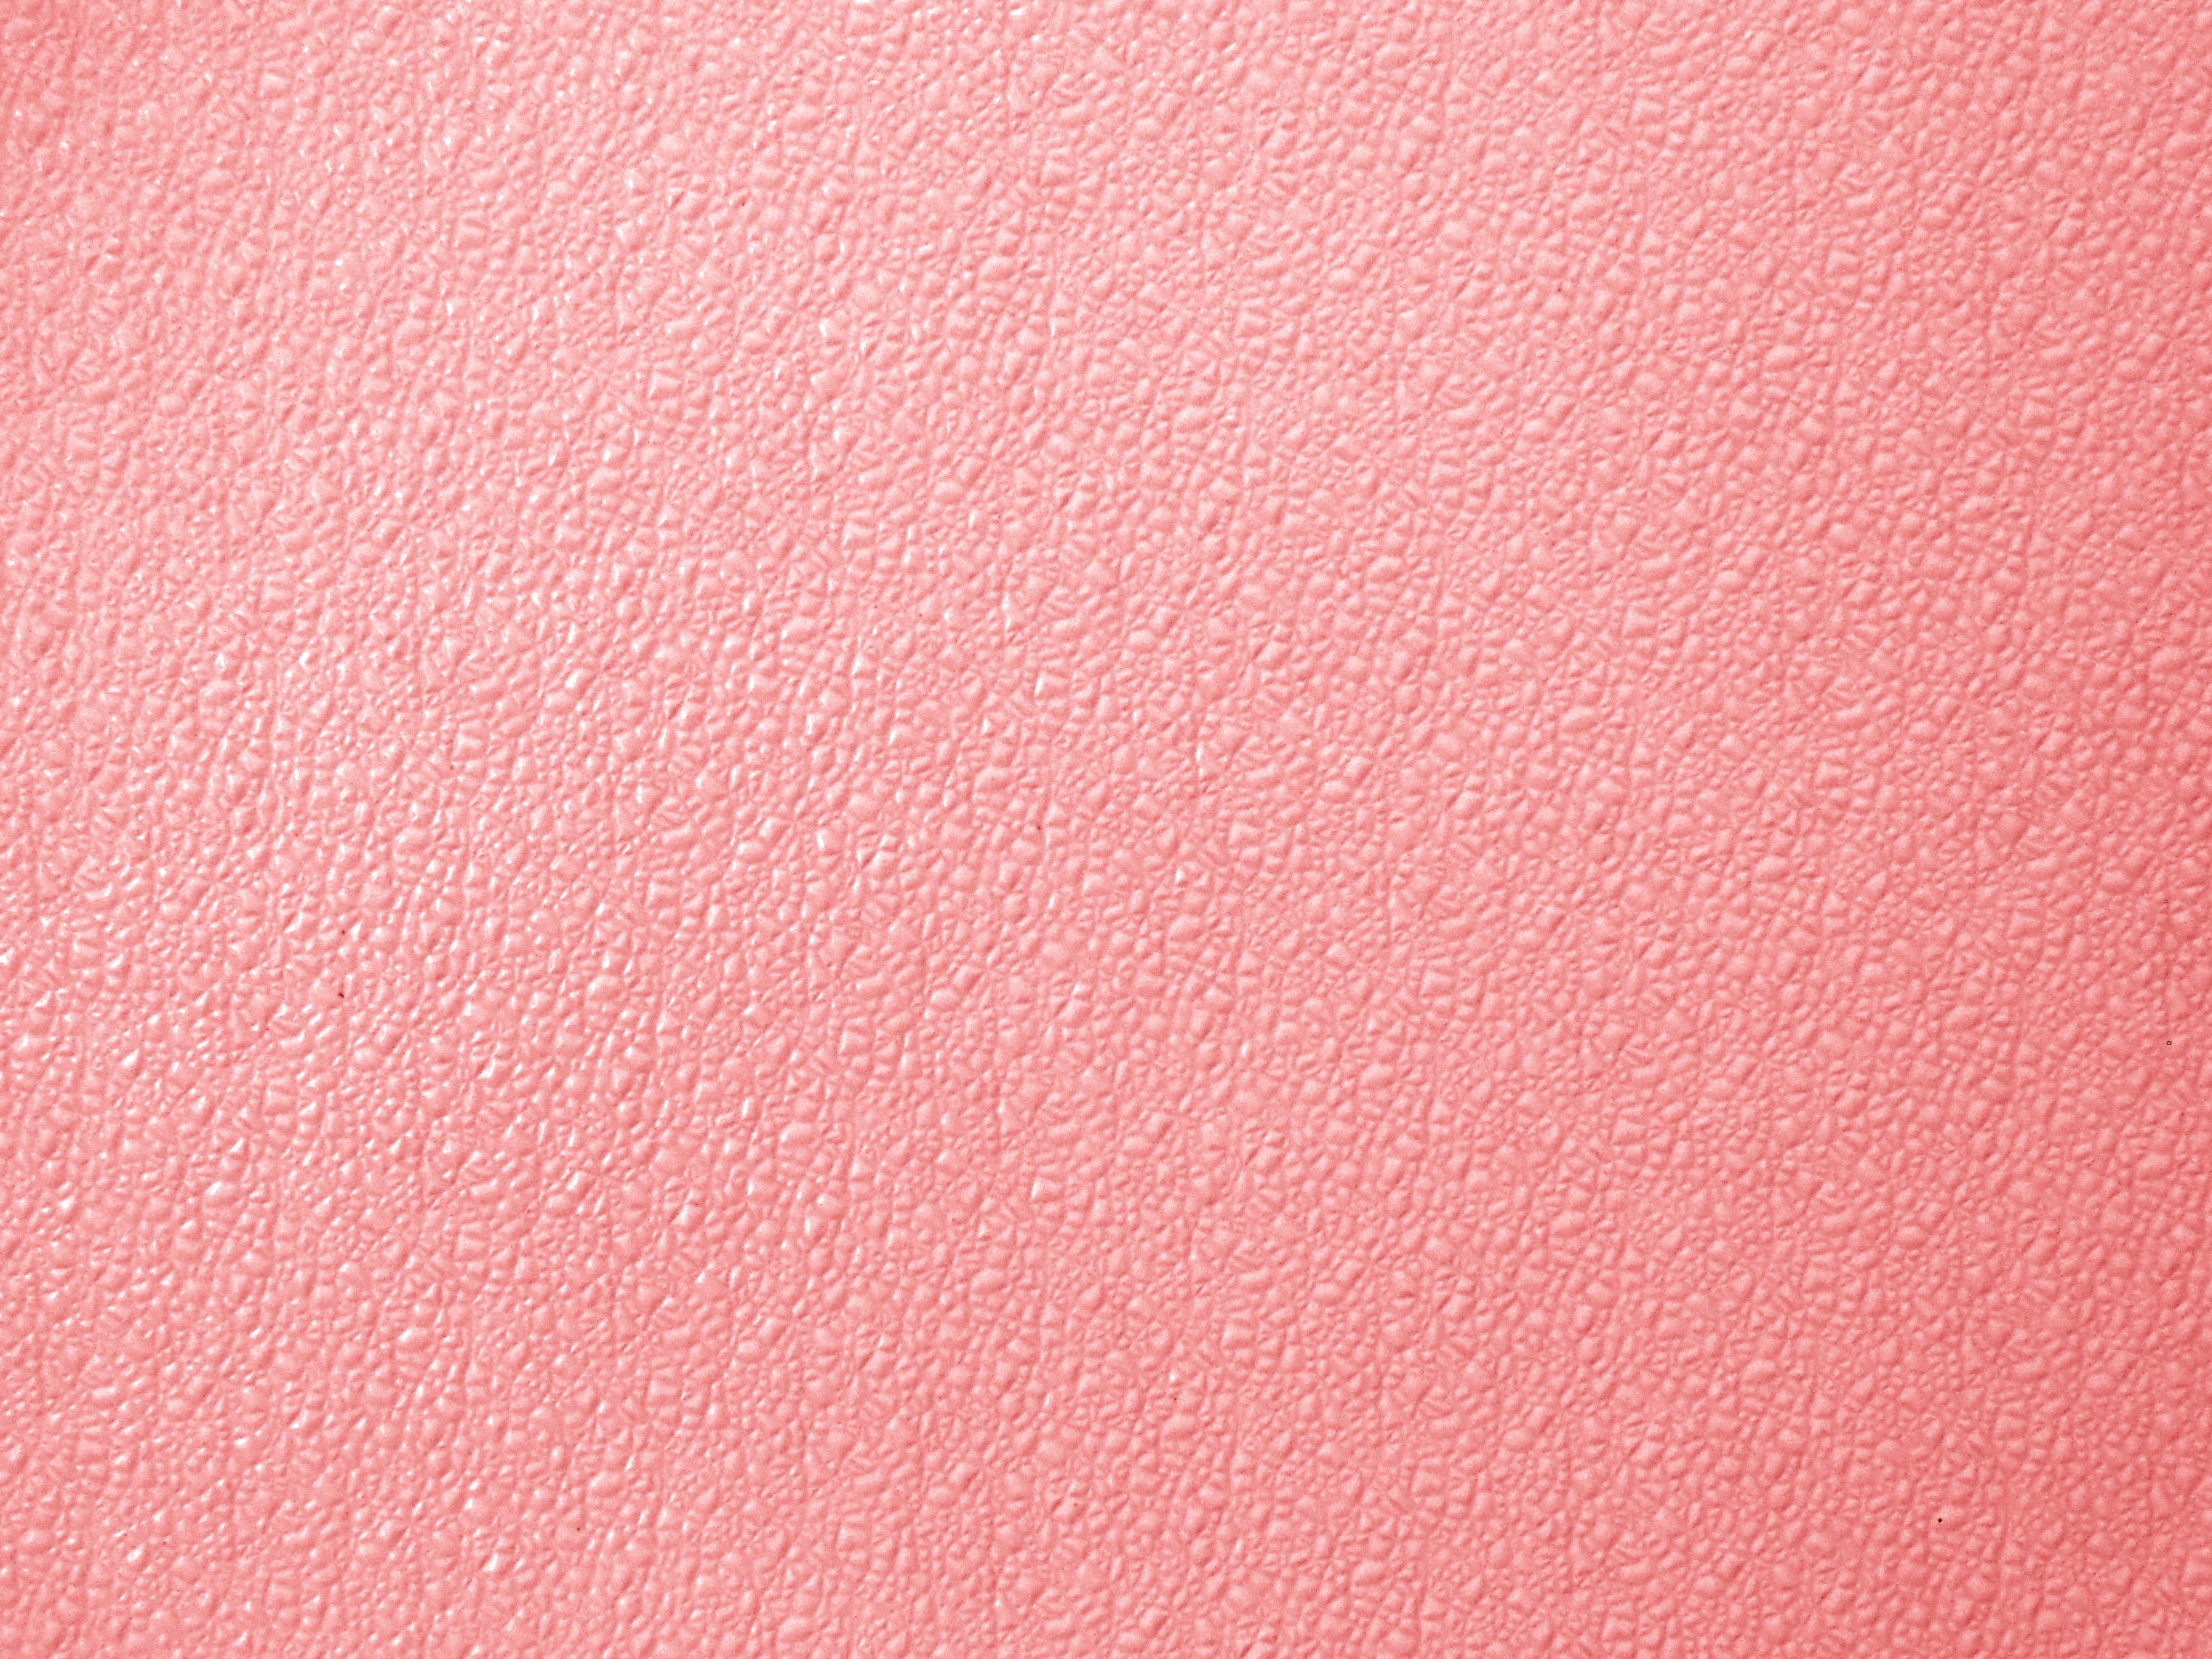 Bumpy Salmon Red Plastic Texture Picture | Free Photograph | Photos ...